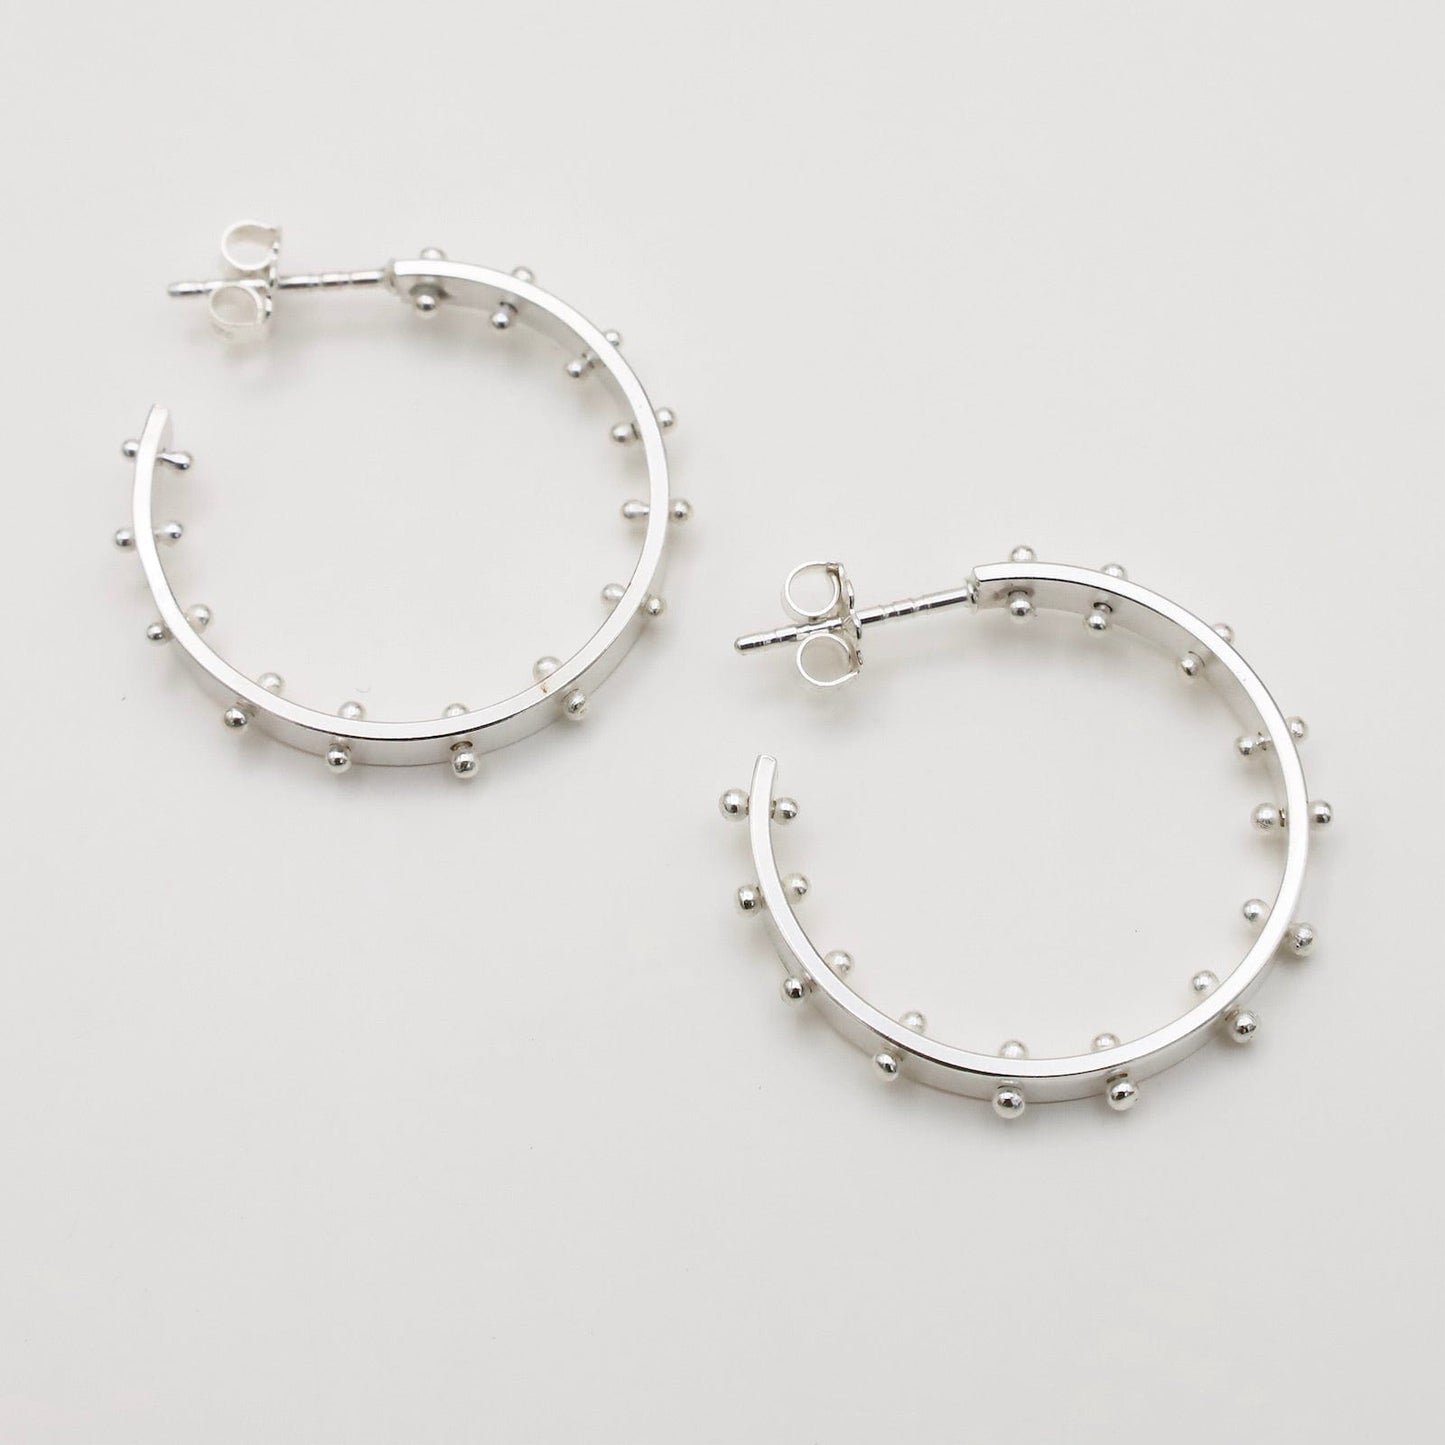 EAR Small Ball Hoops in Polished Silver